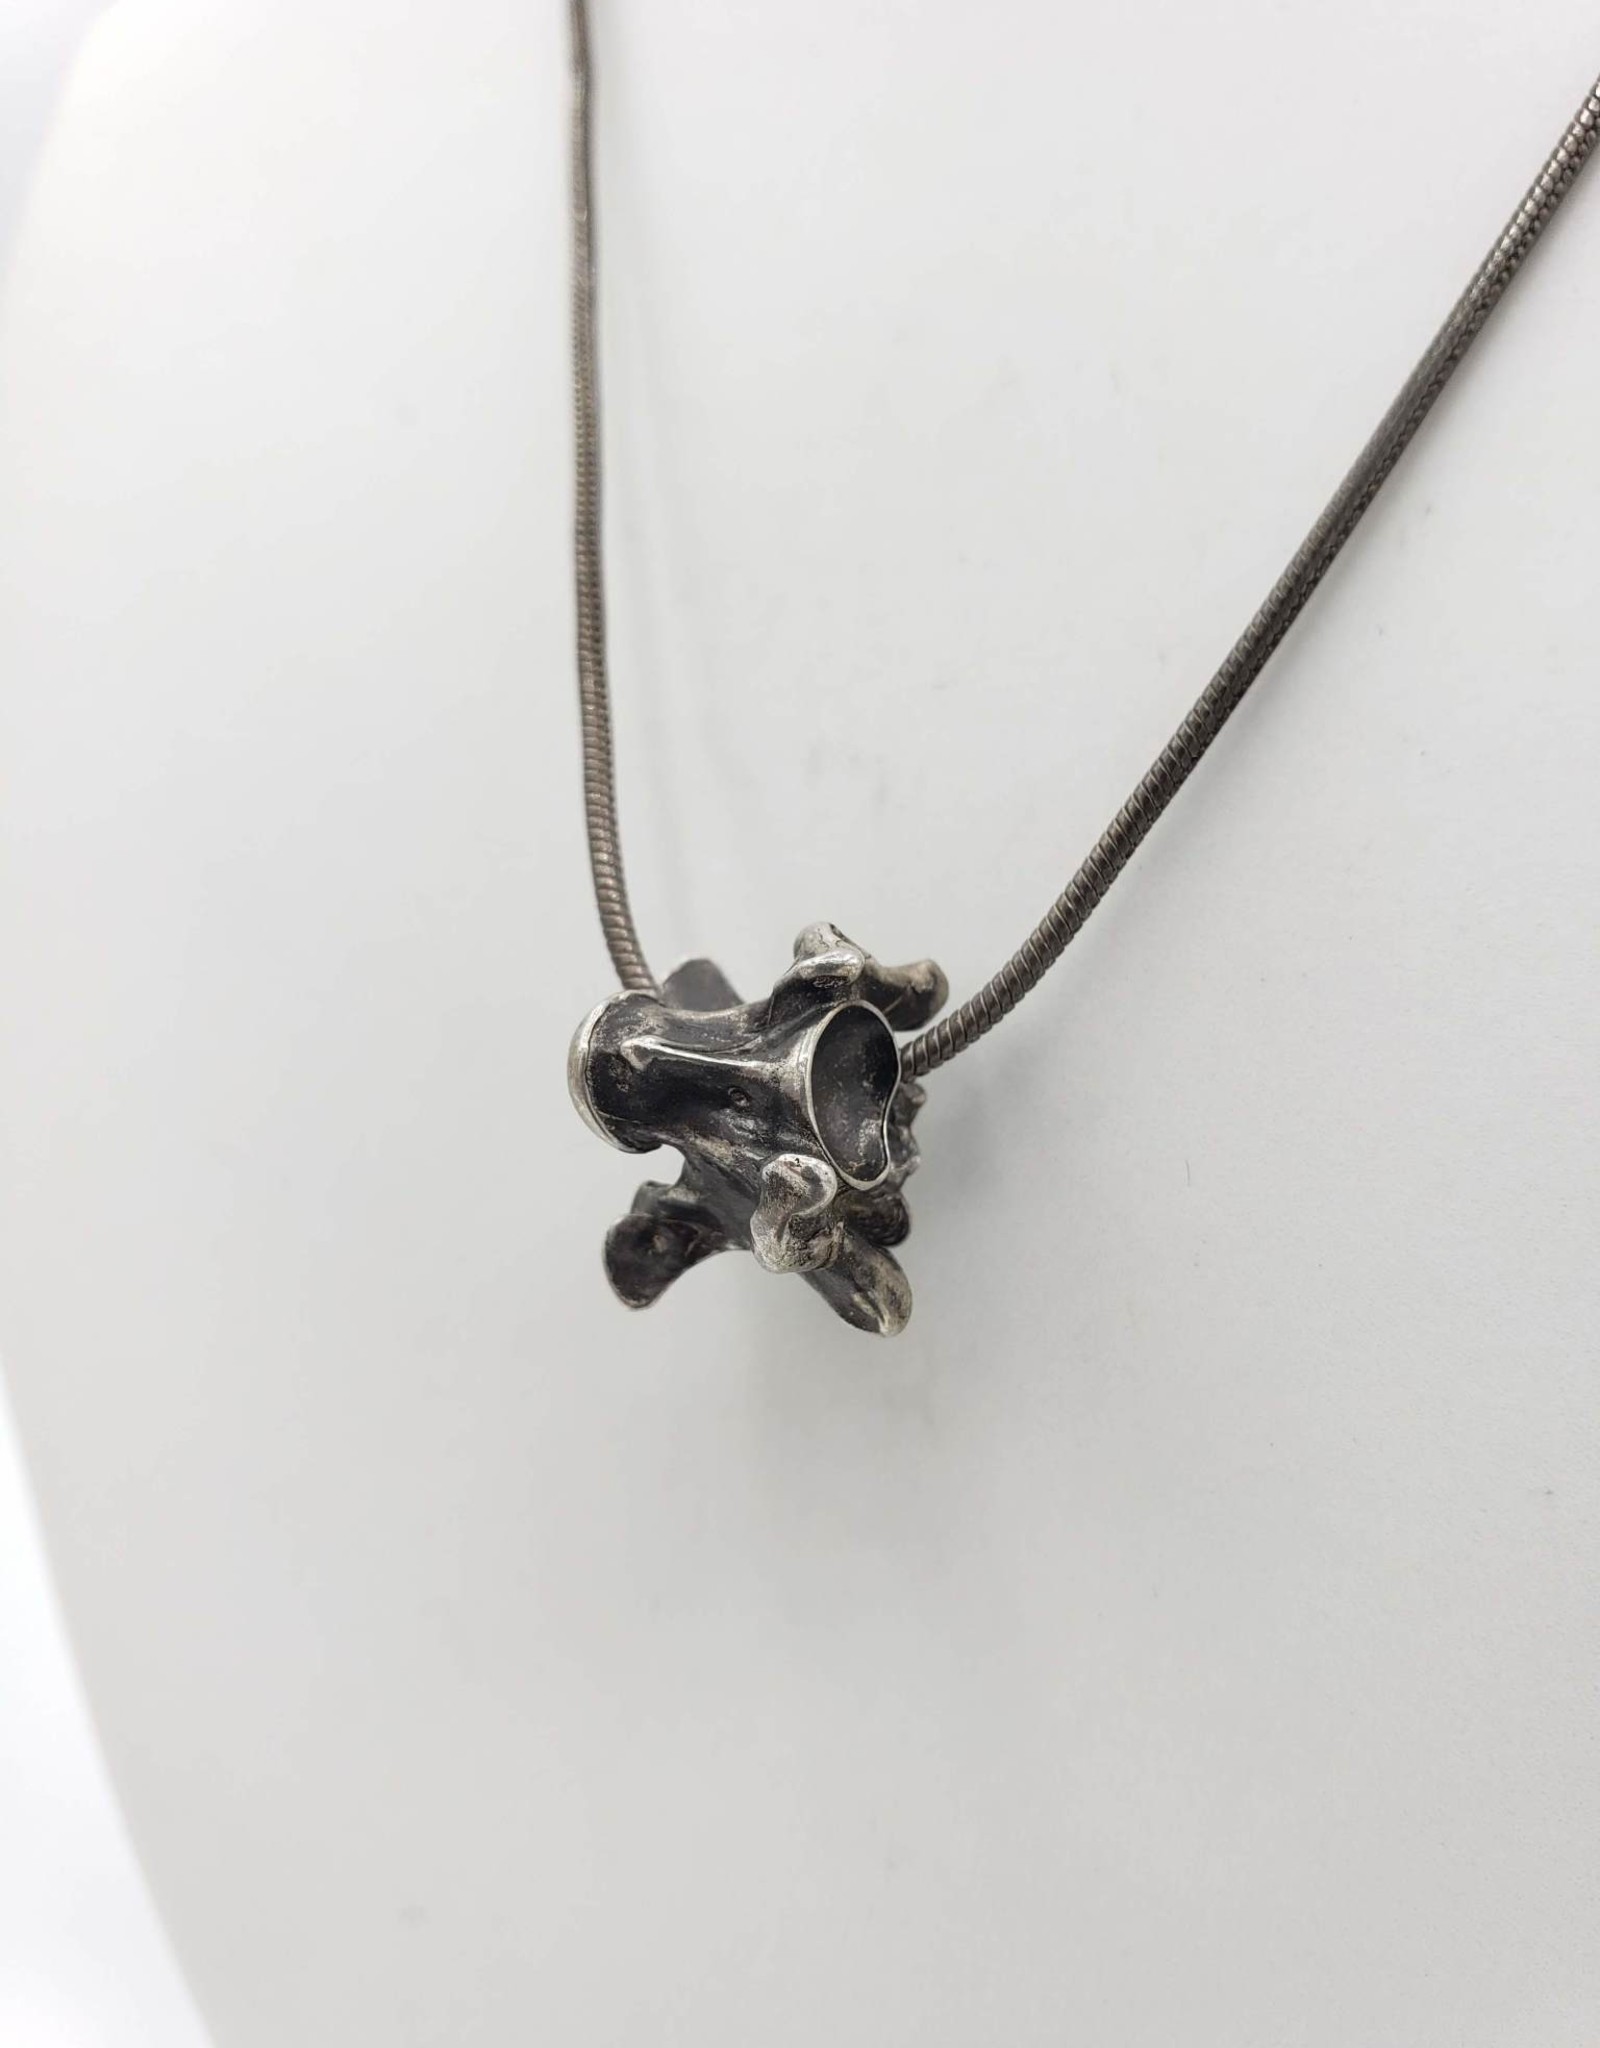 Redux Snake vertebra cast in Sterling Silver, brushed and oxidized